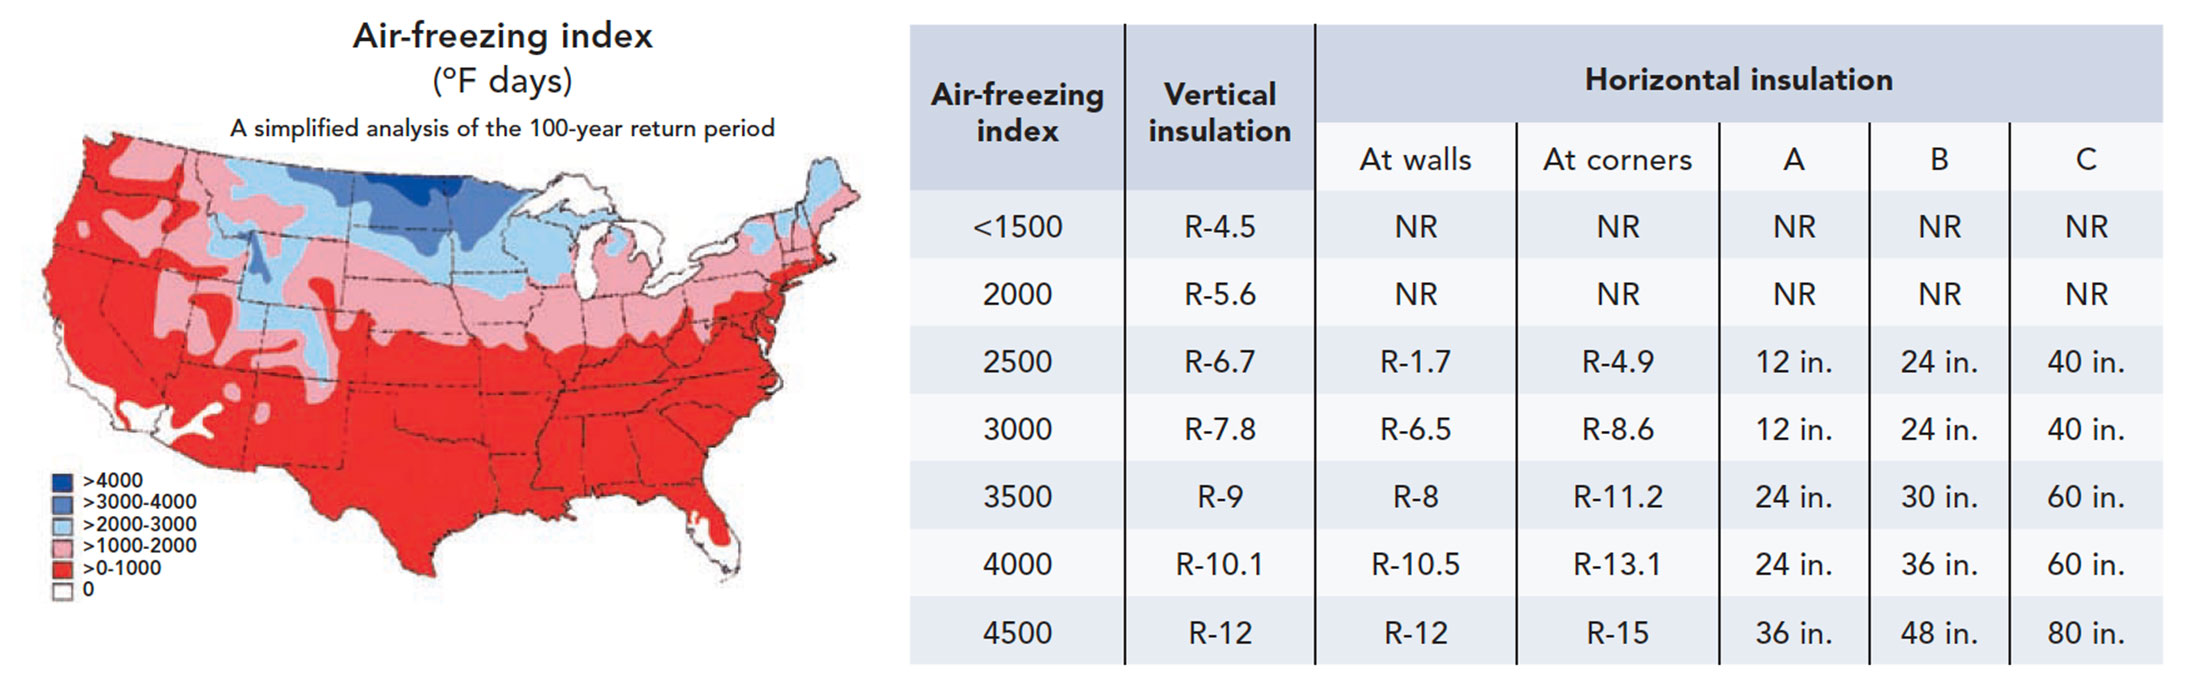 Air-freezing index with horizontal insulation chart